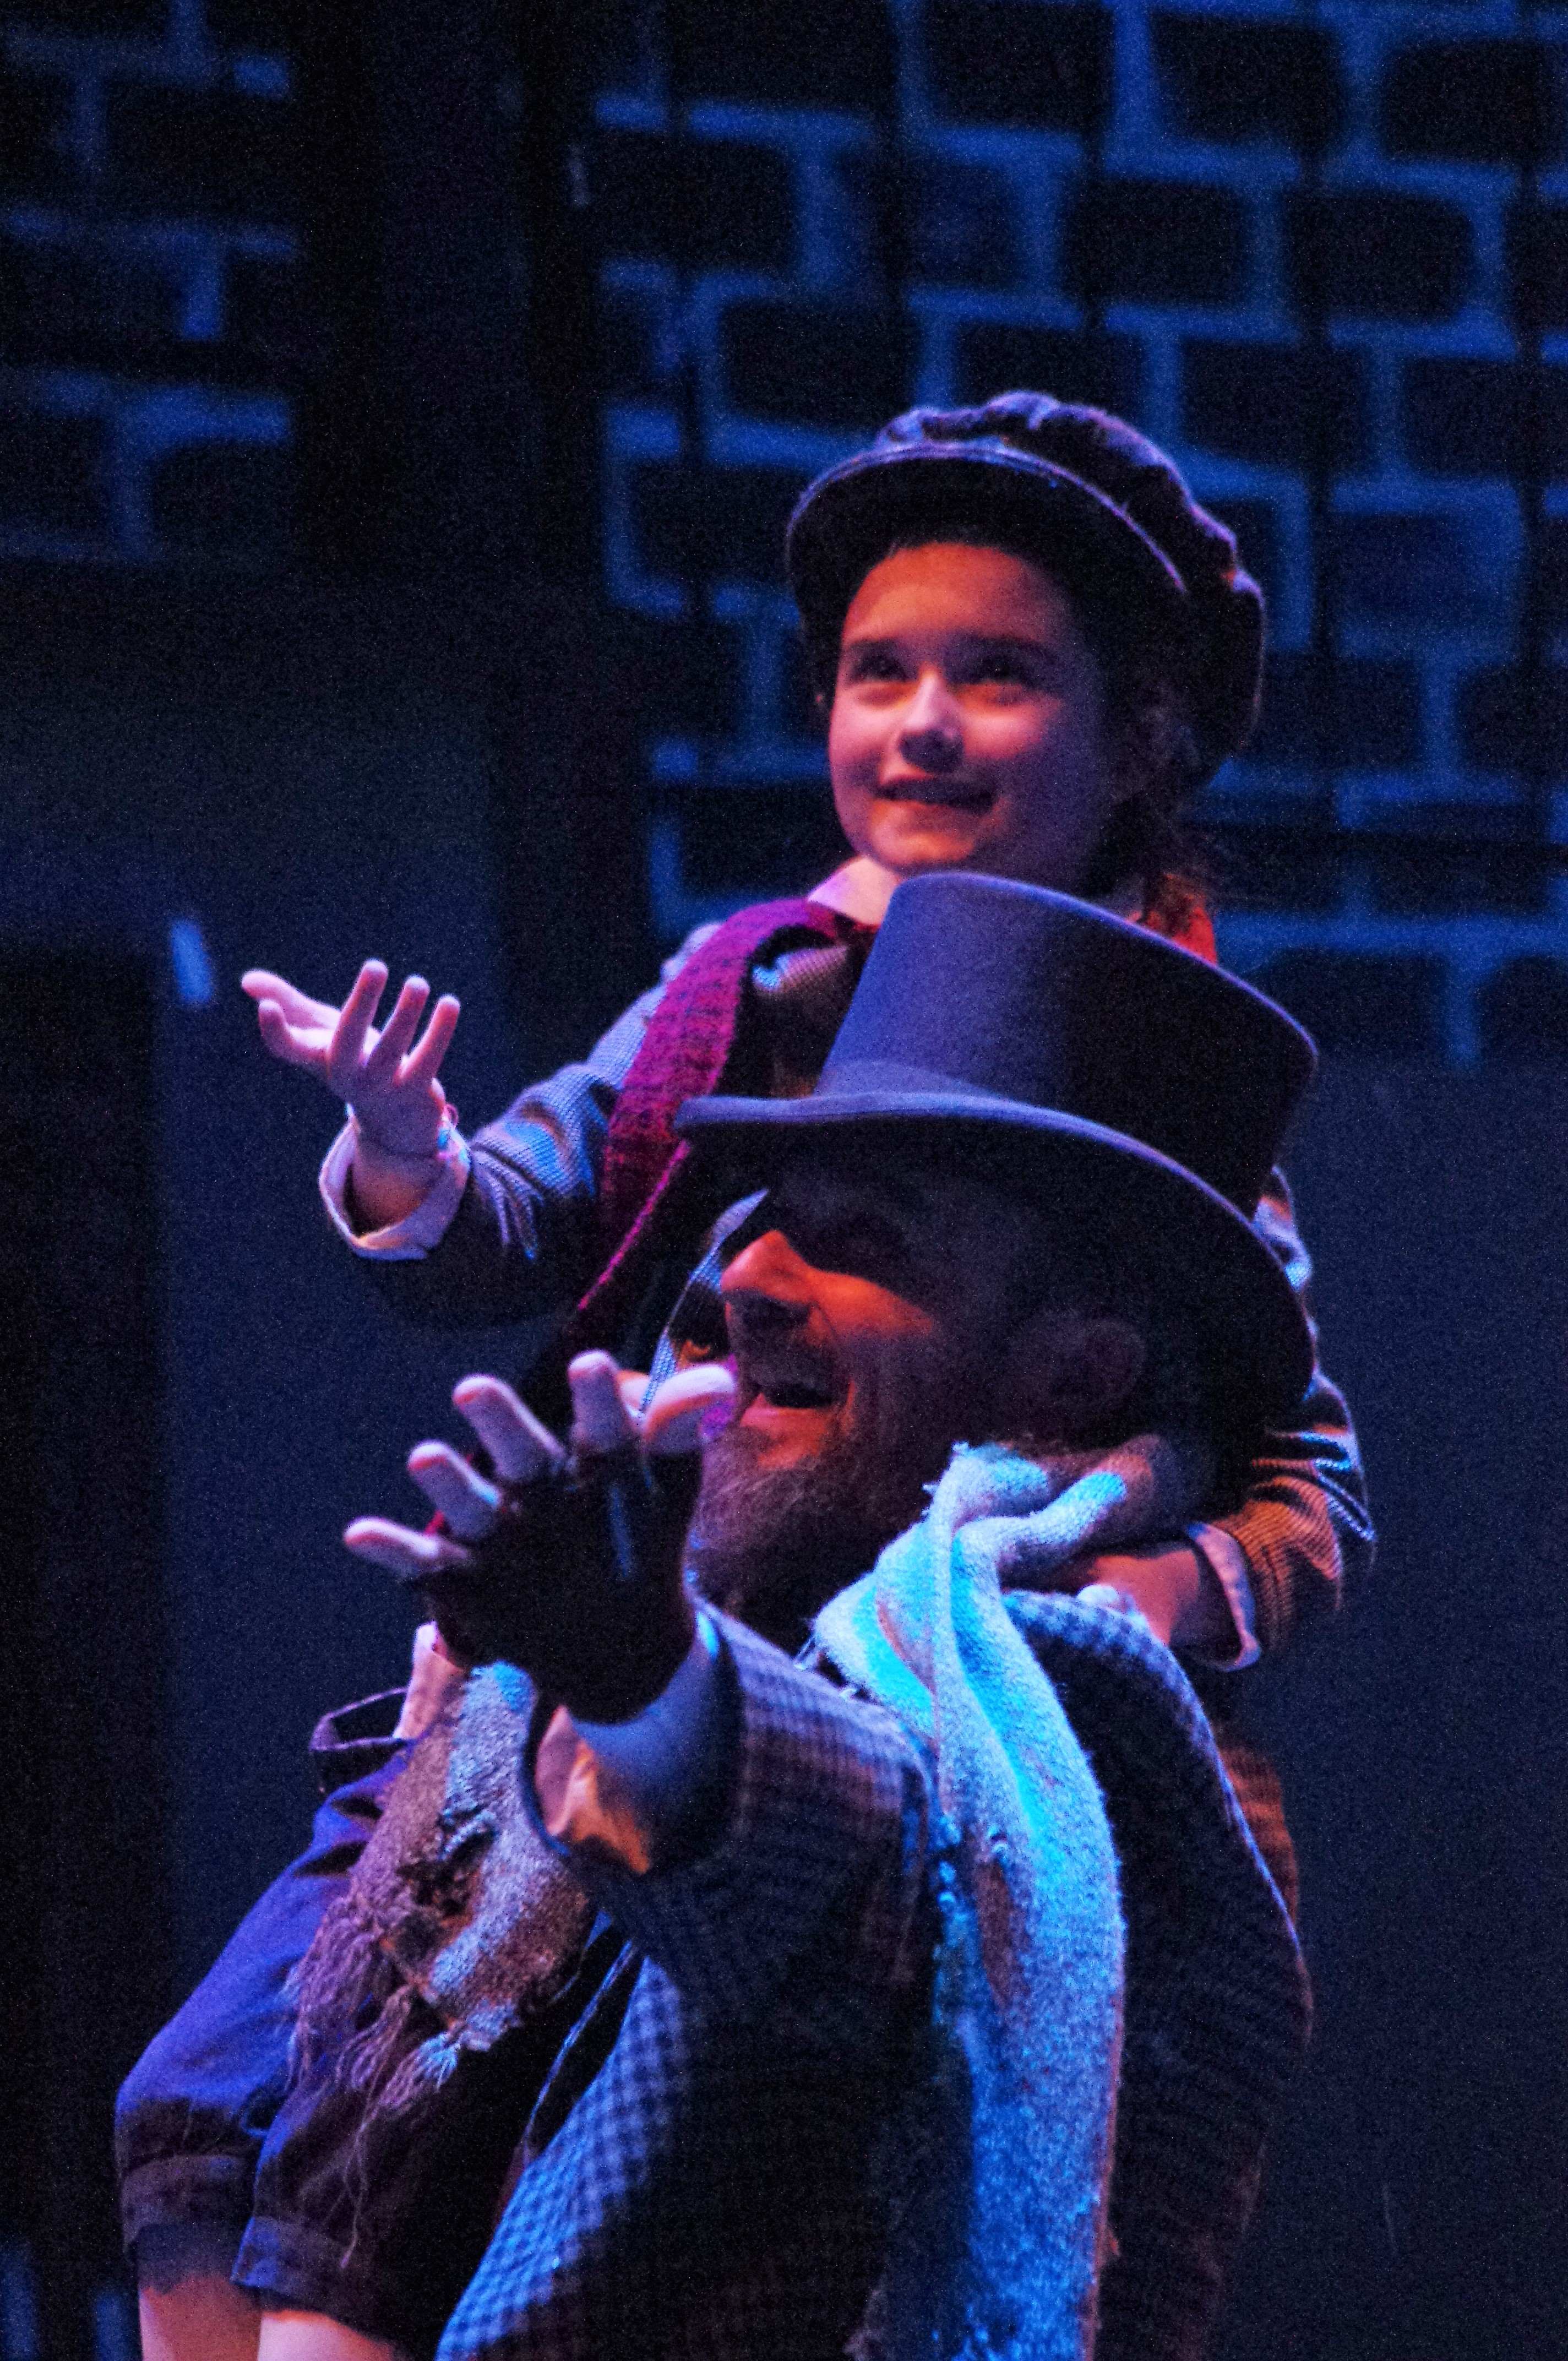 Tiny Tim and Bob Cratchit RED team